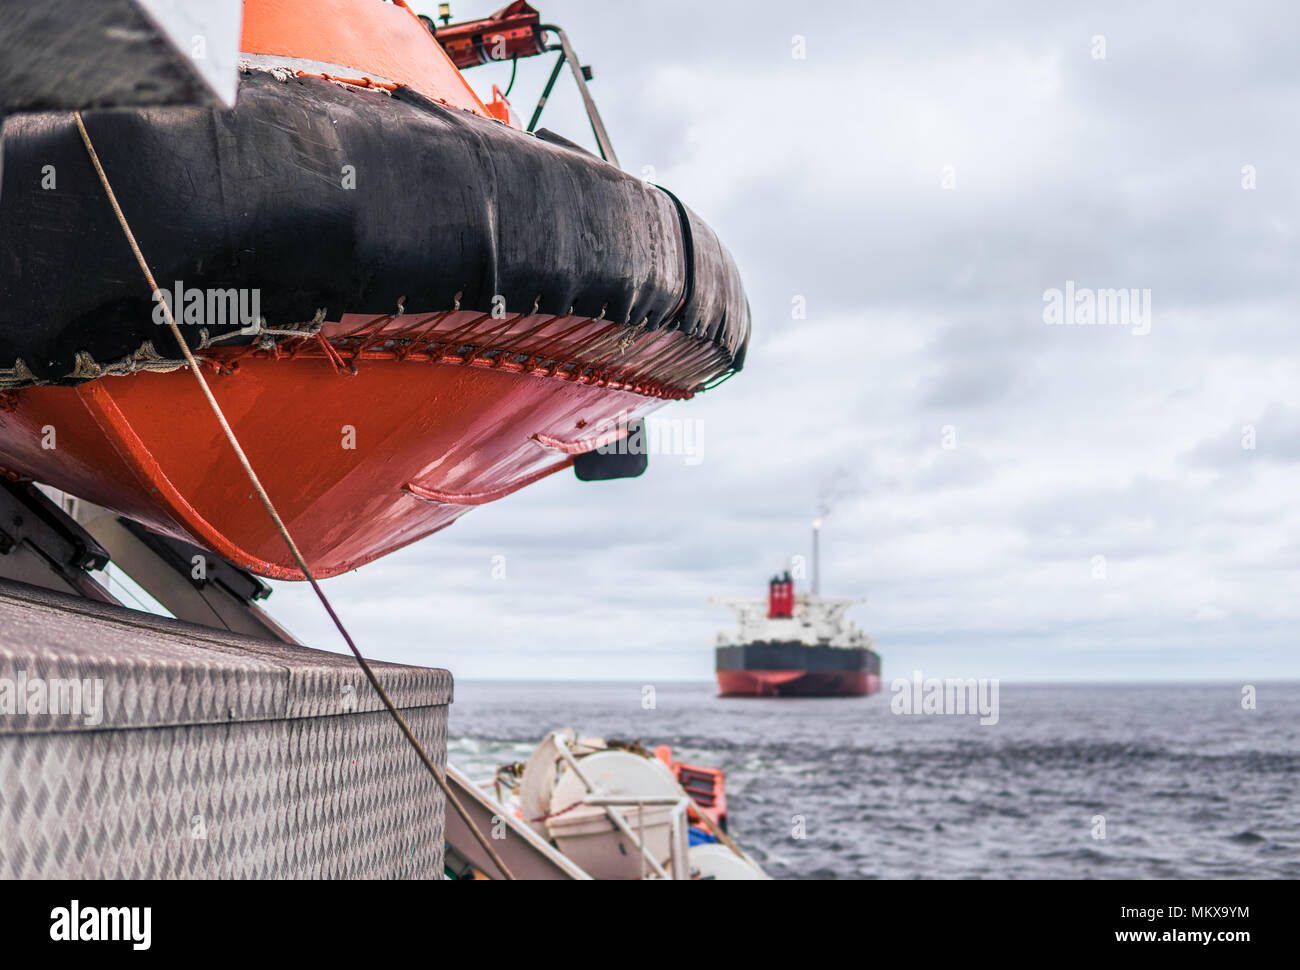 Lifeboat or FRC rescue boat in the vessel at sea. Tanker ship is on background Stock Photo